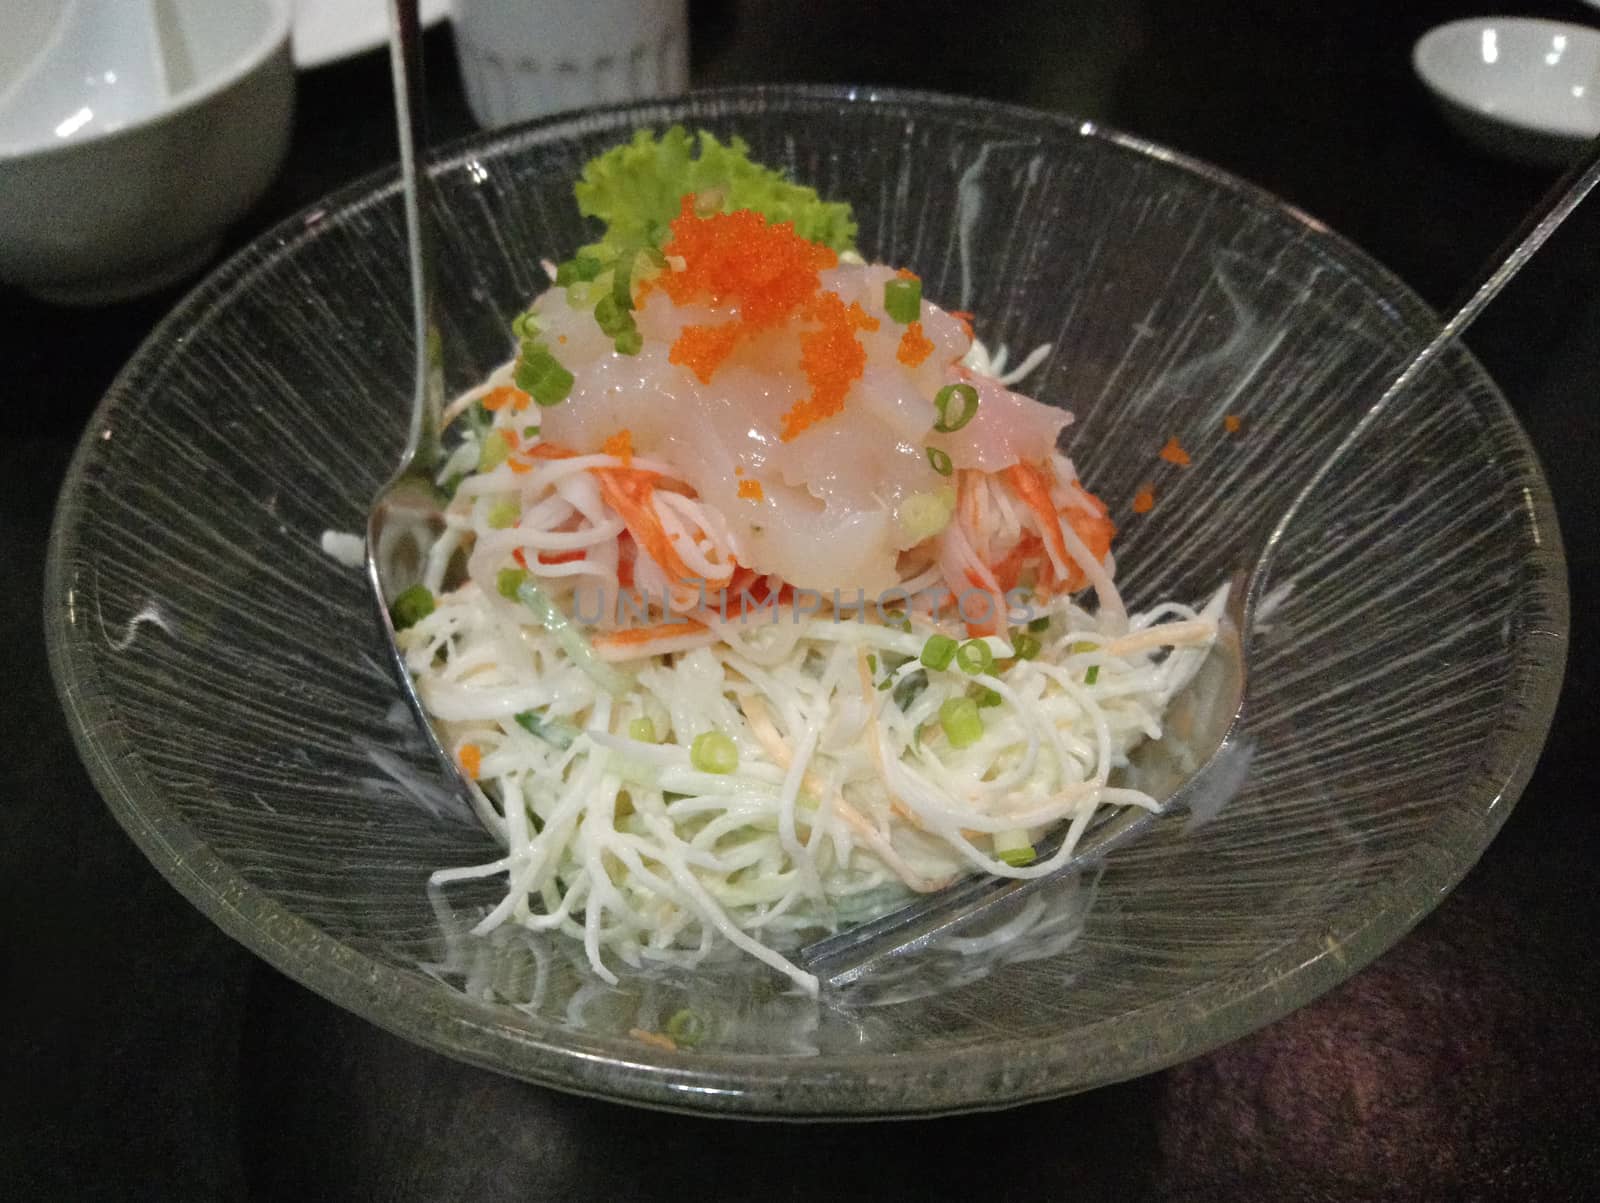 Kani salad place in bowl Japanese cuisine by imwaltersy